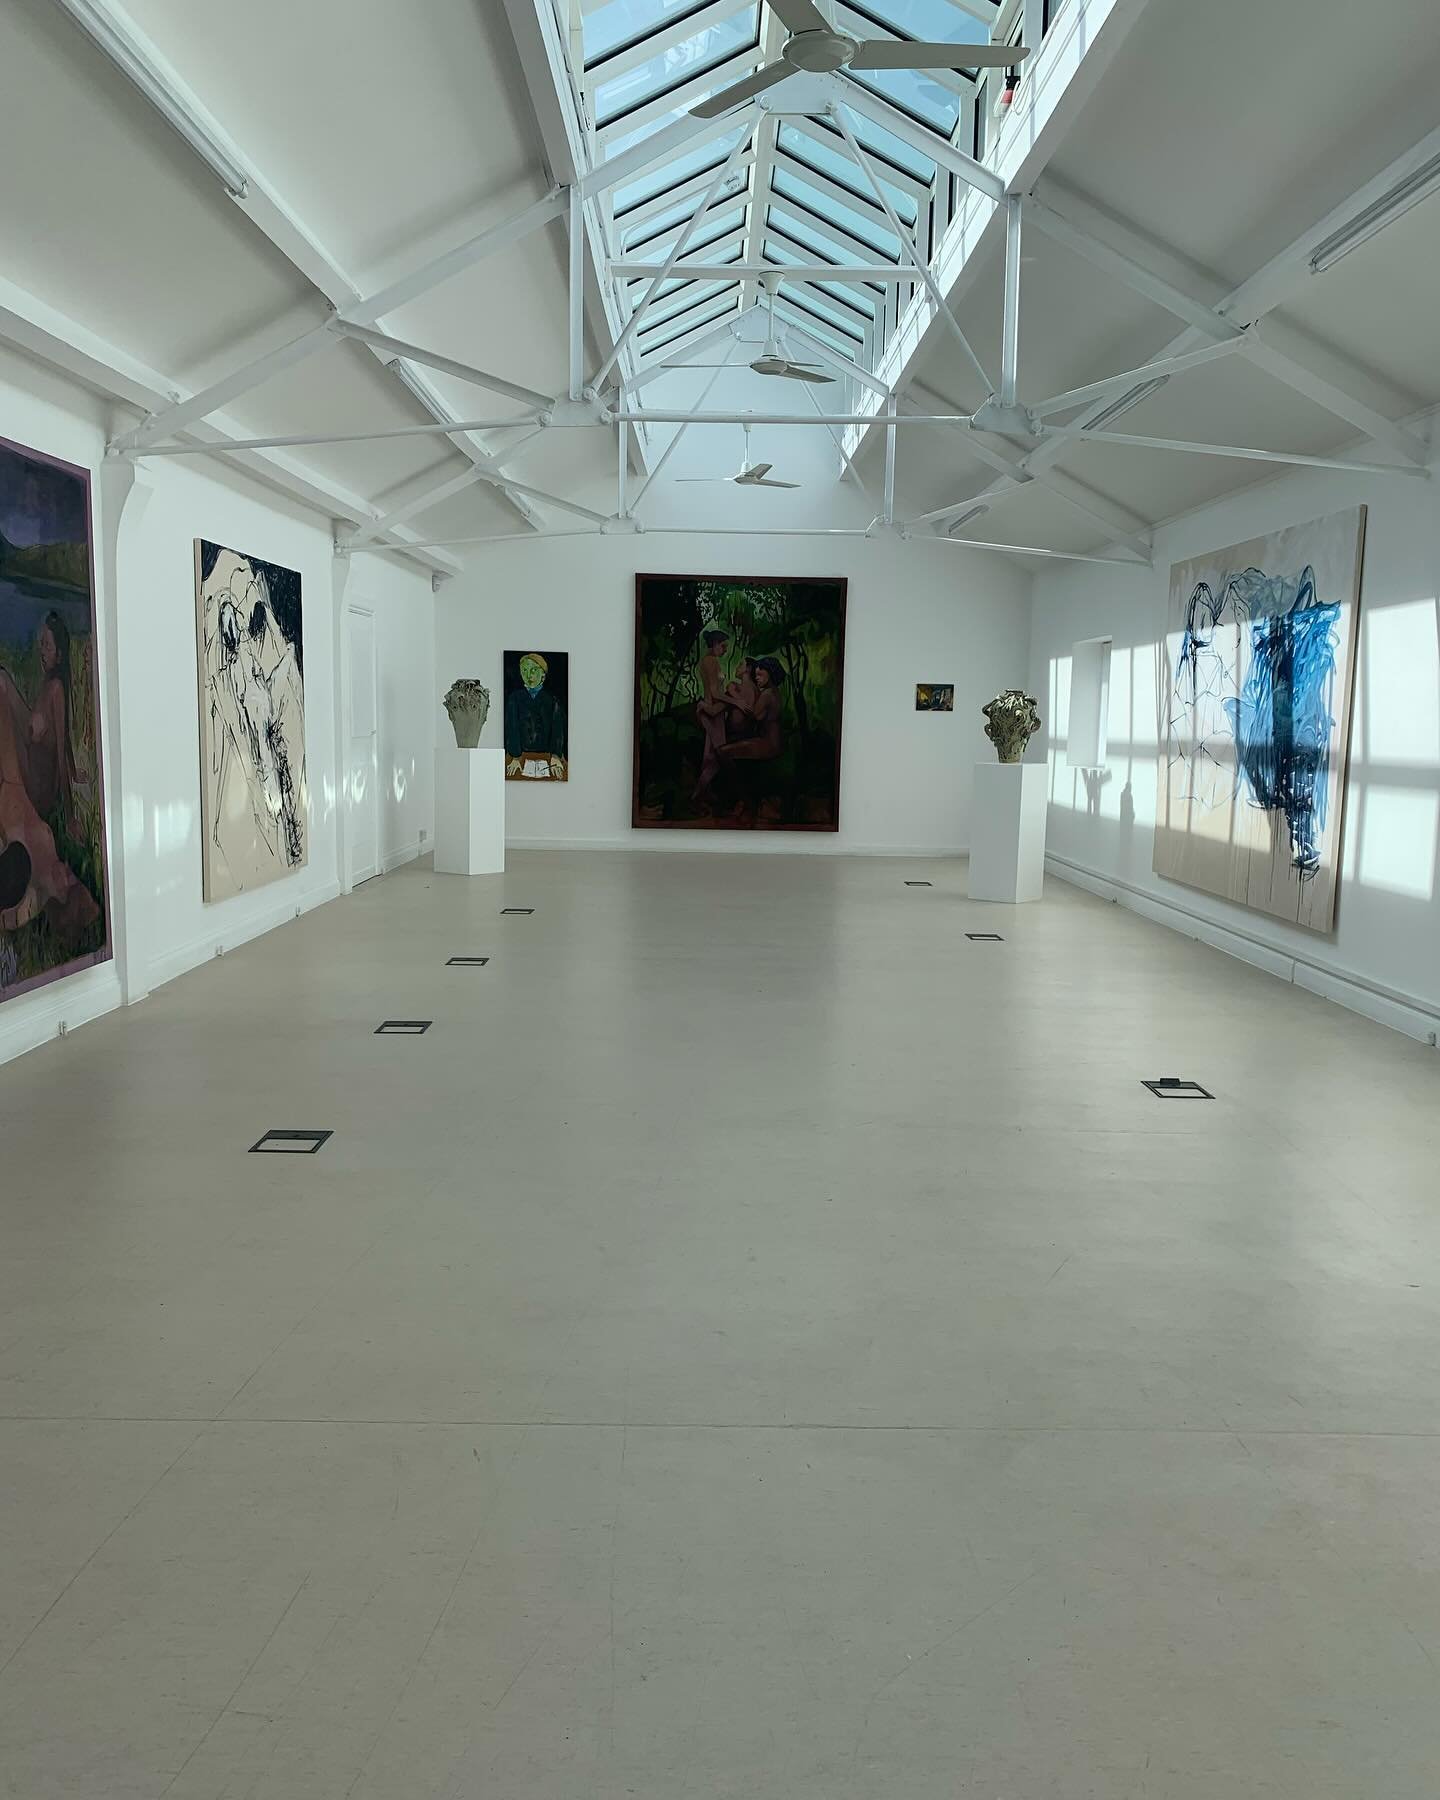 We do not Sleep exhibition at
TKE Studios
An inspiring exhibition and a wonderful space. Emin&rsquo;s  residency programme looks fantastic 💚 

Exhibiting artists:
Layla Andrews
Elissa Cray
Tracey Emin
Laura Footes
Joline Kwakkenbos
Gabriela Max
Lind